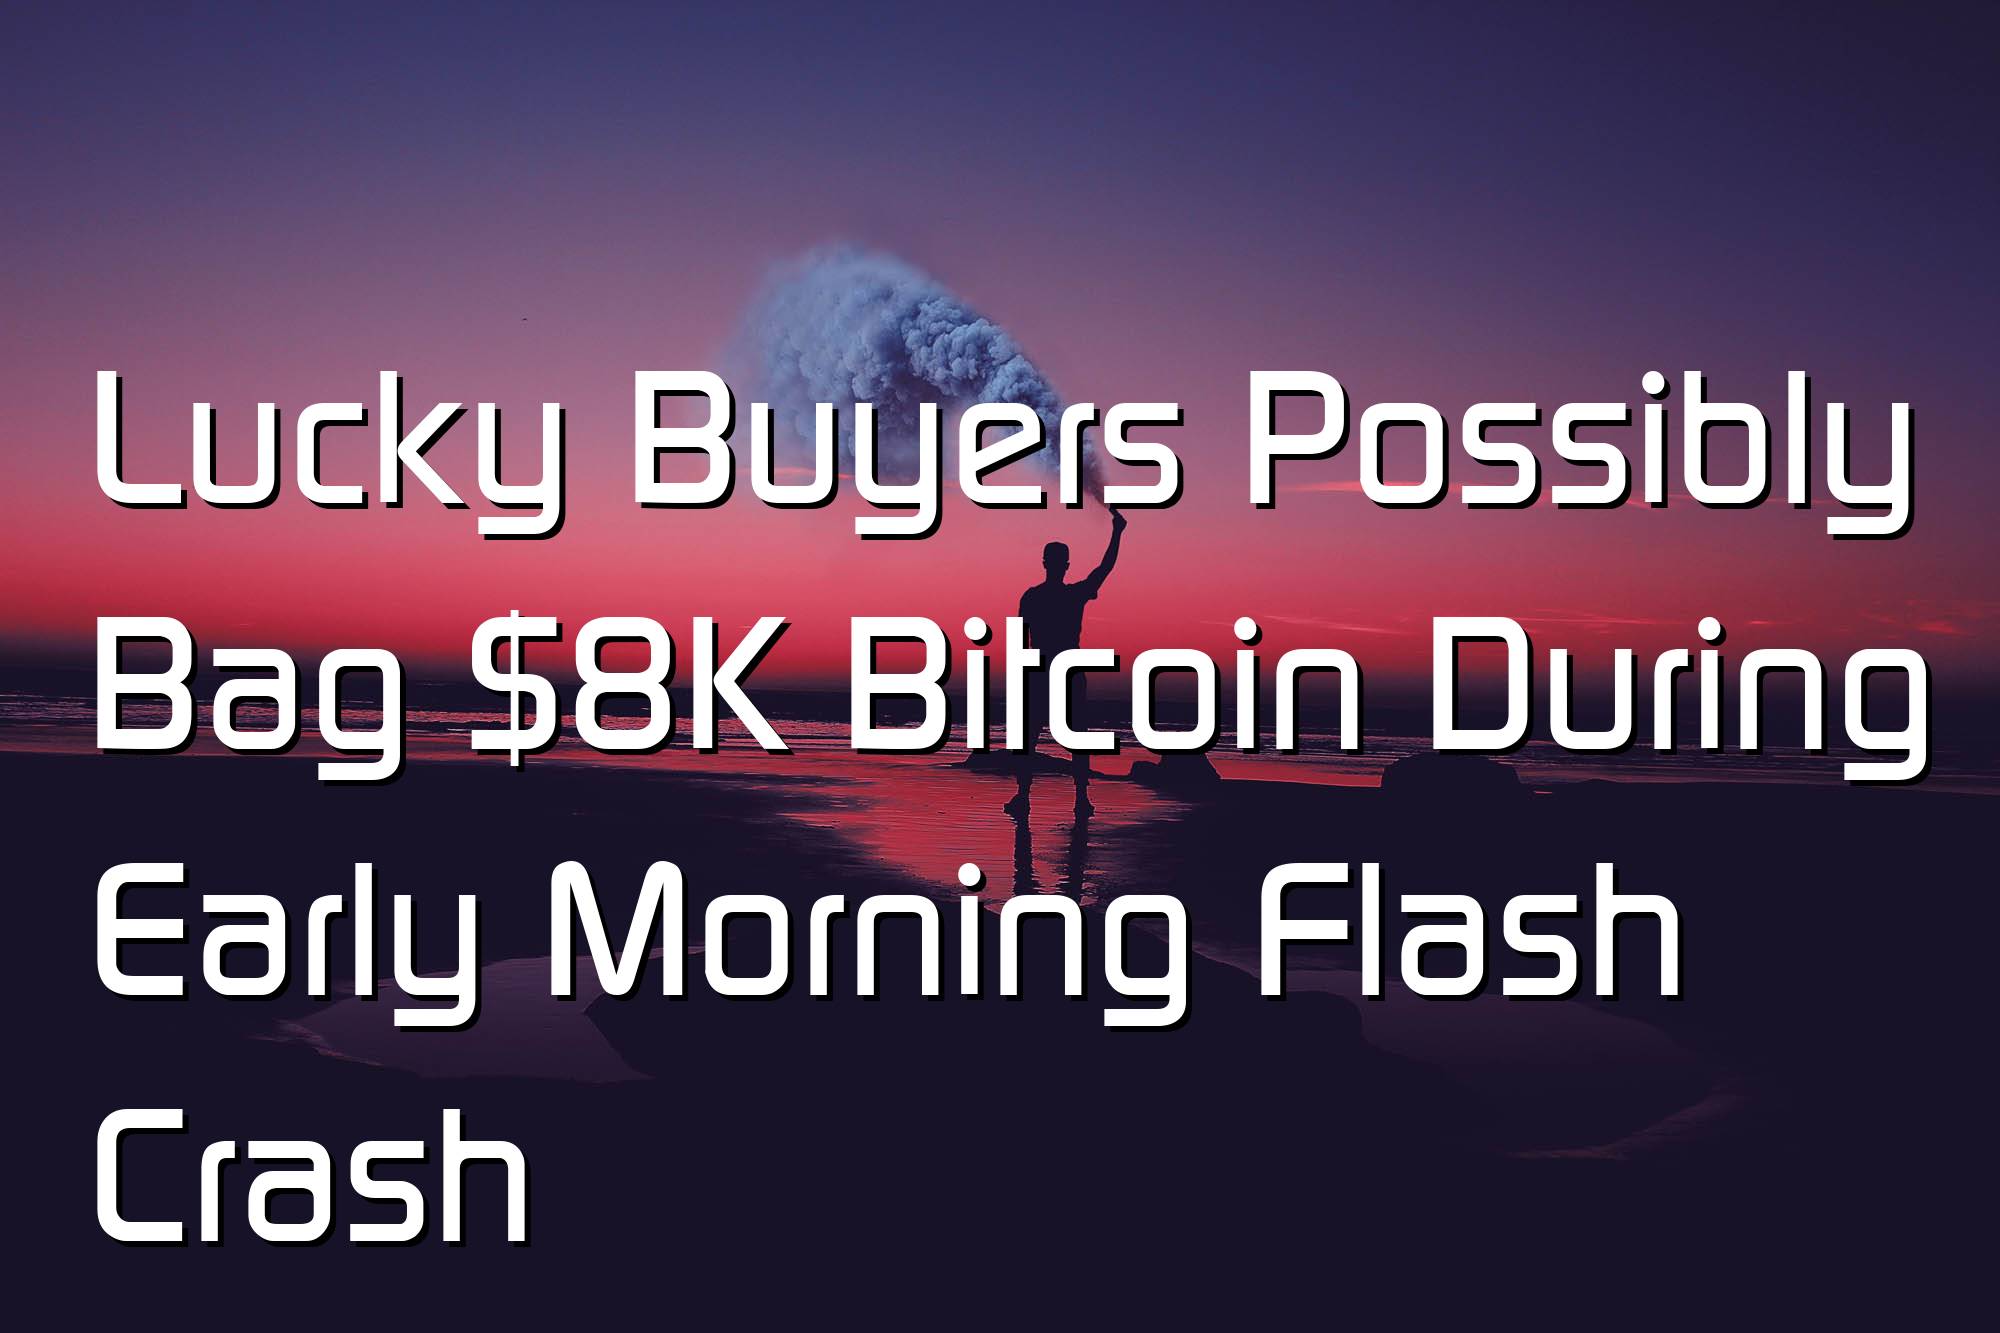 @$62622.18 Lucky Buyers Possibly Bag $8K Bitcoin During Early Morning Flash Crash